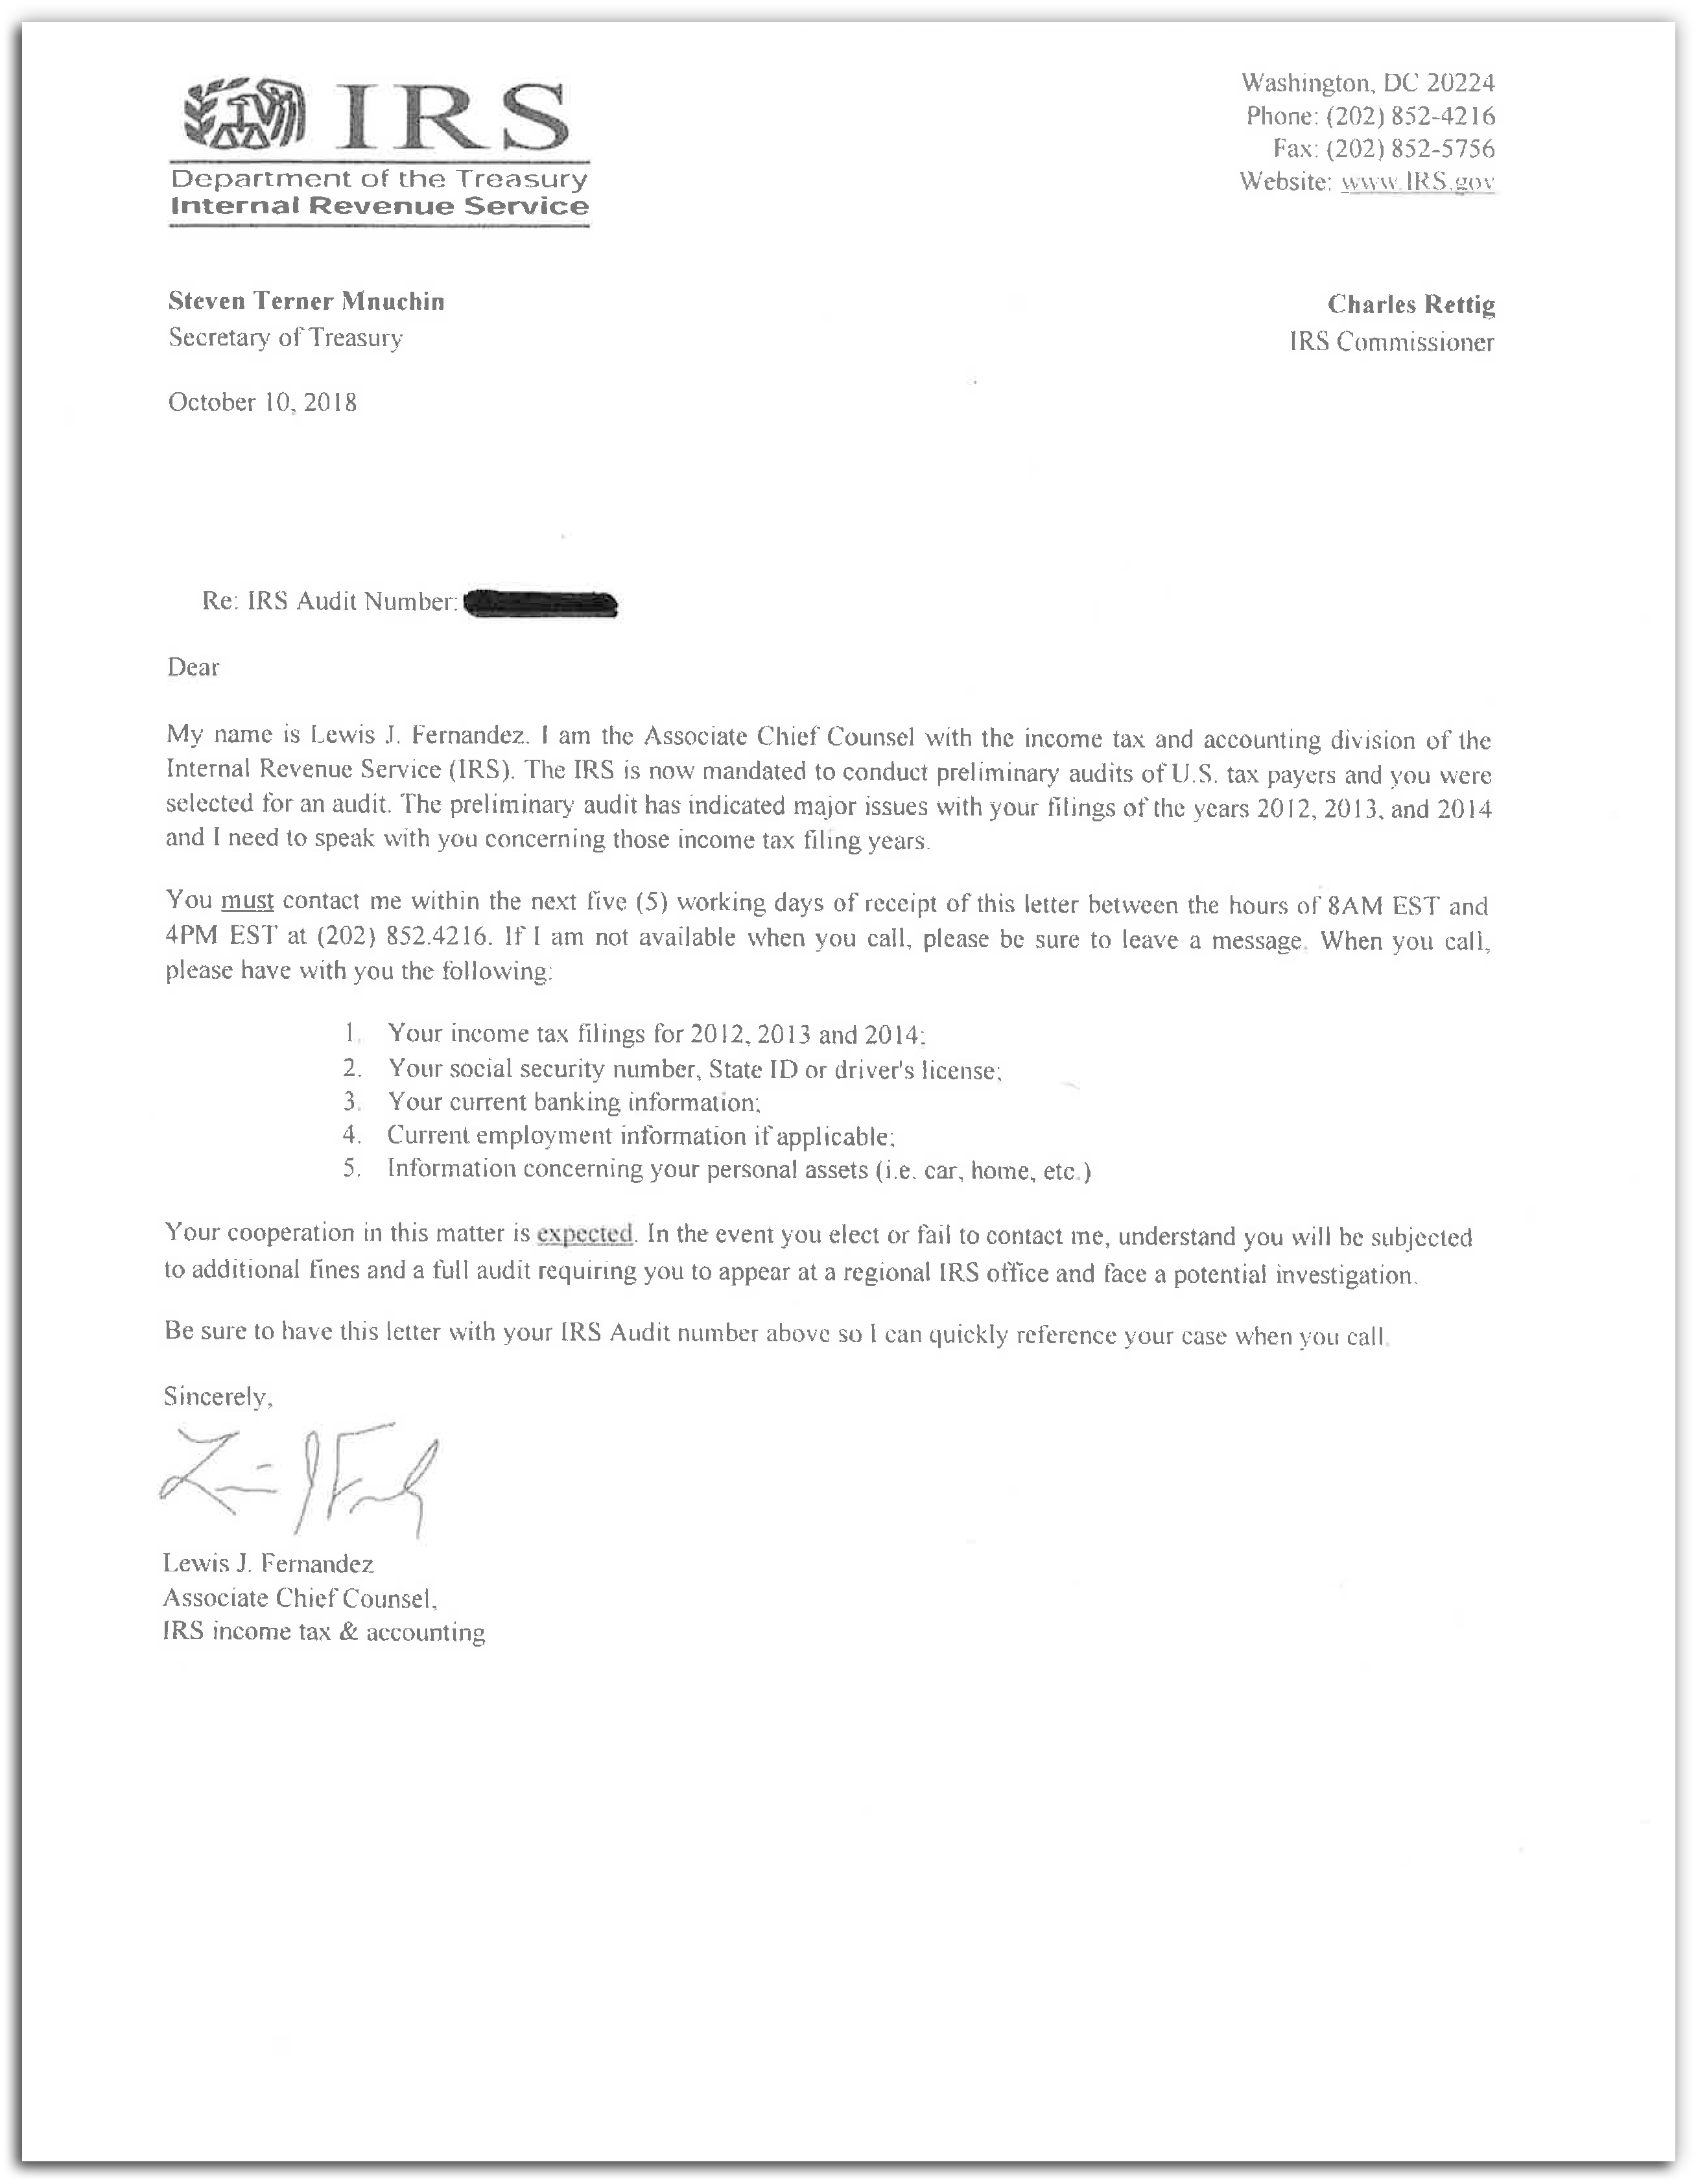 Fake IRS Letter Example